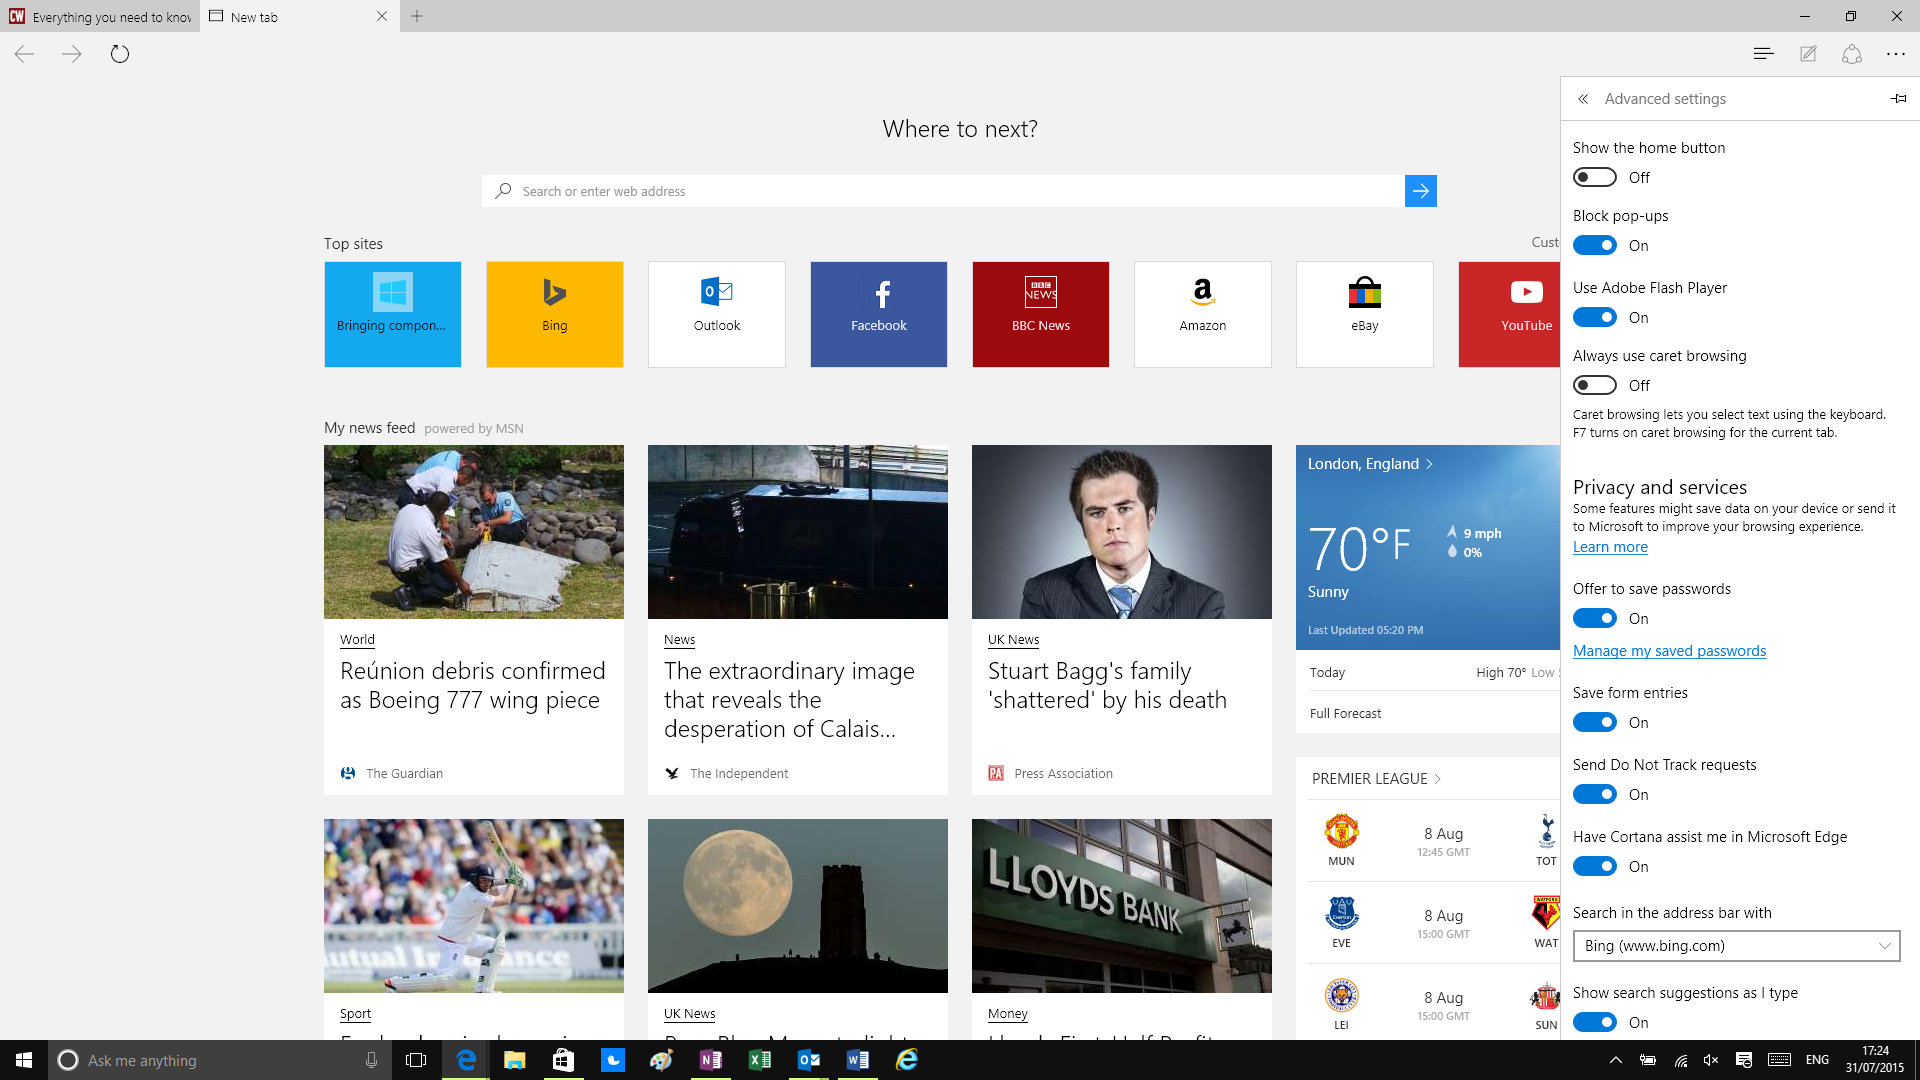 microsoft edge browser for windows 7 download free